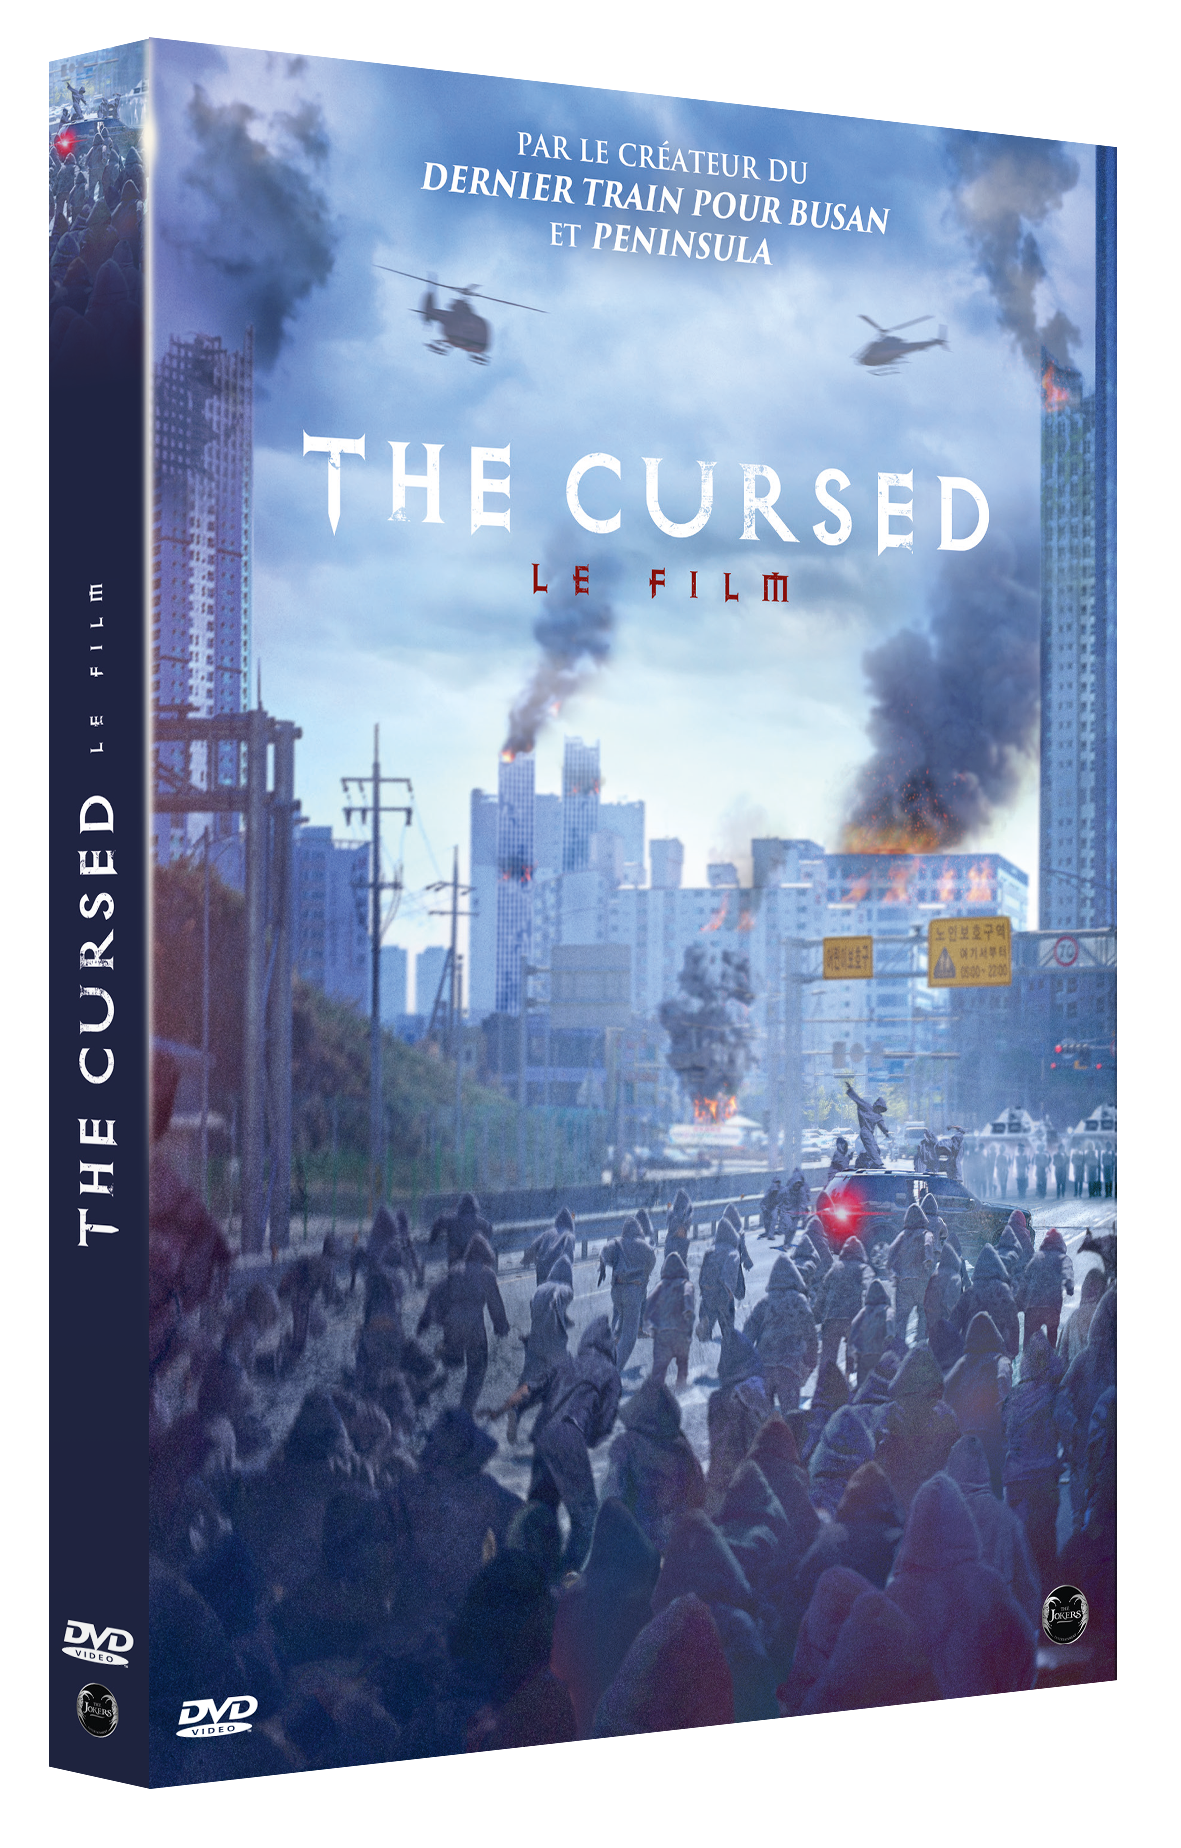 DVD "The Cursed"